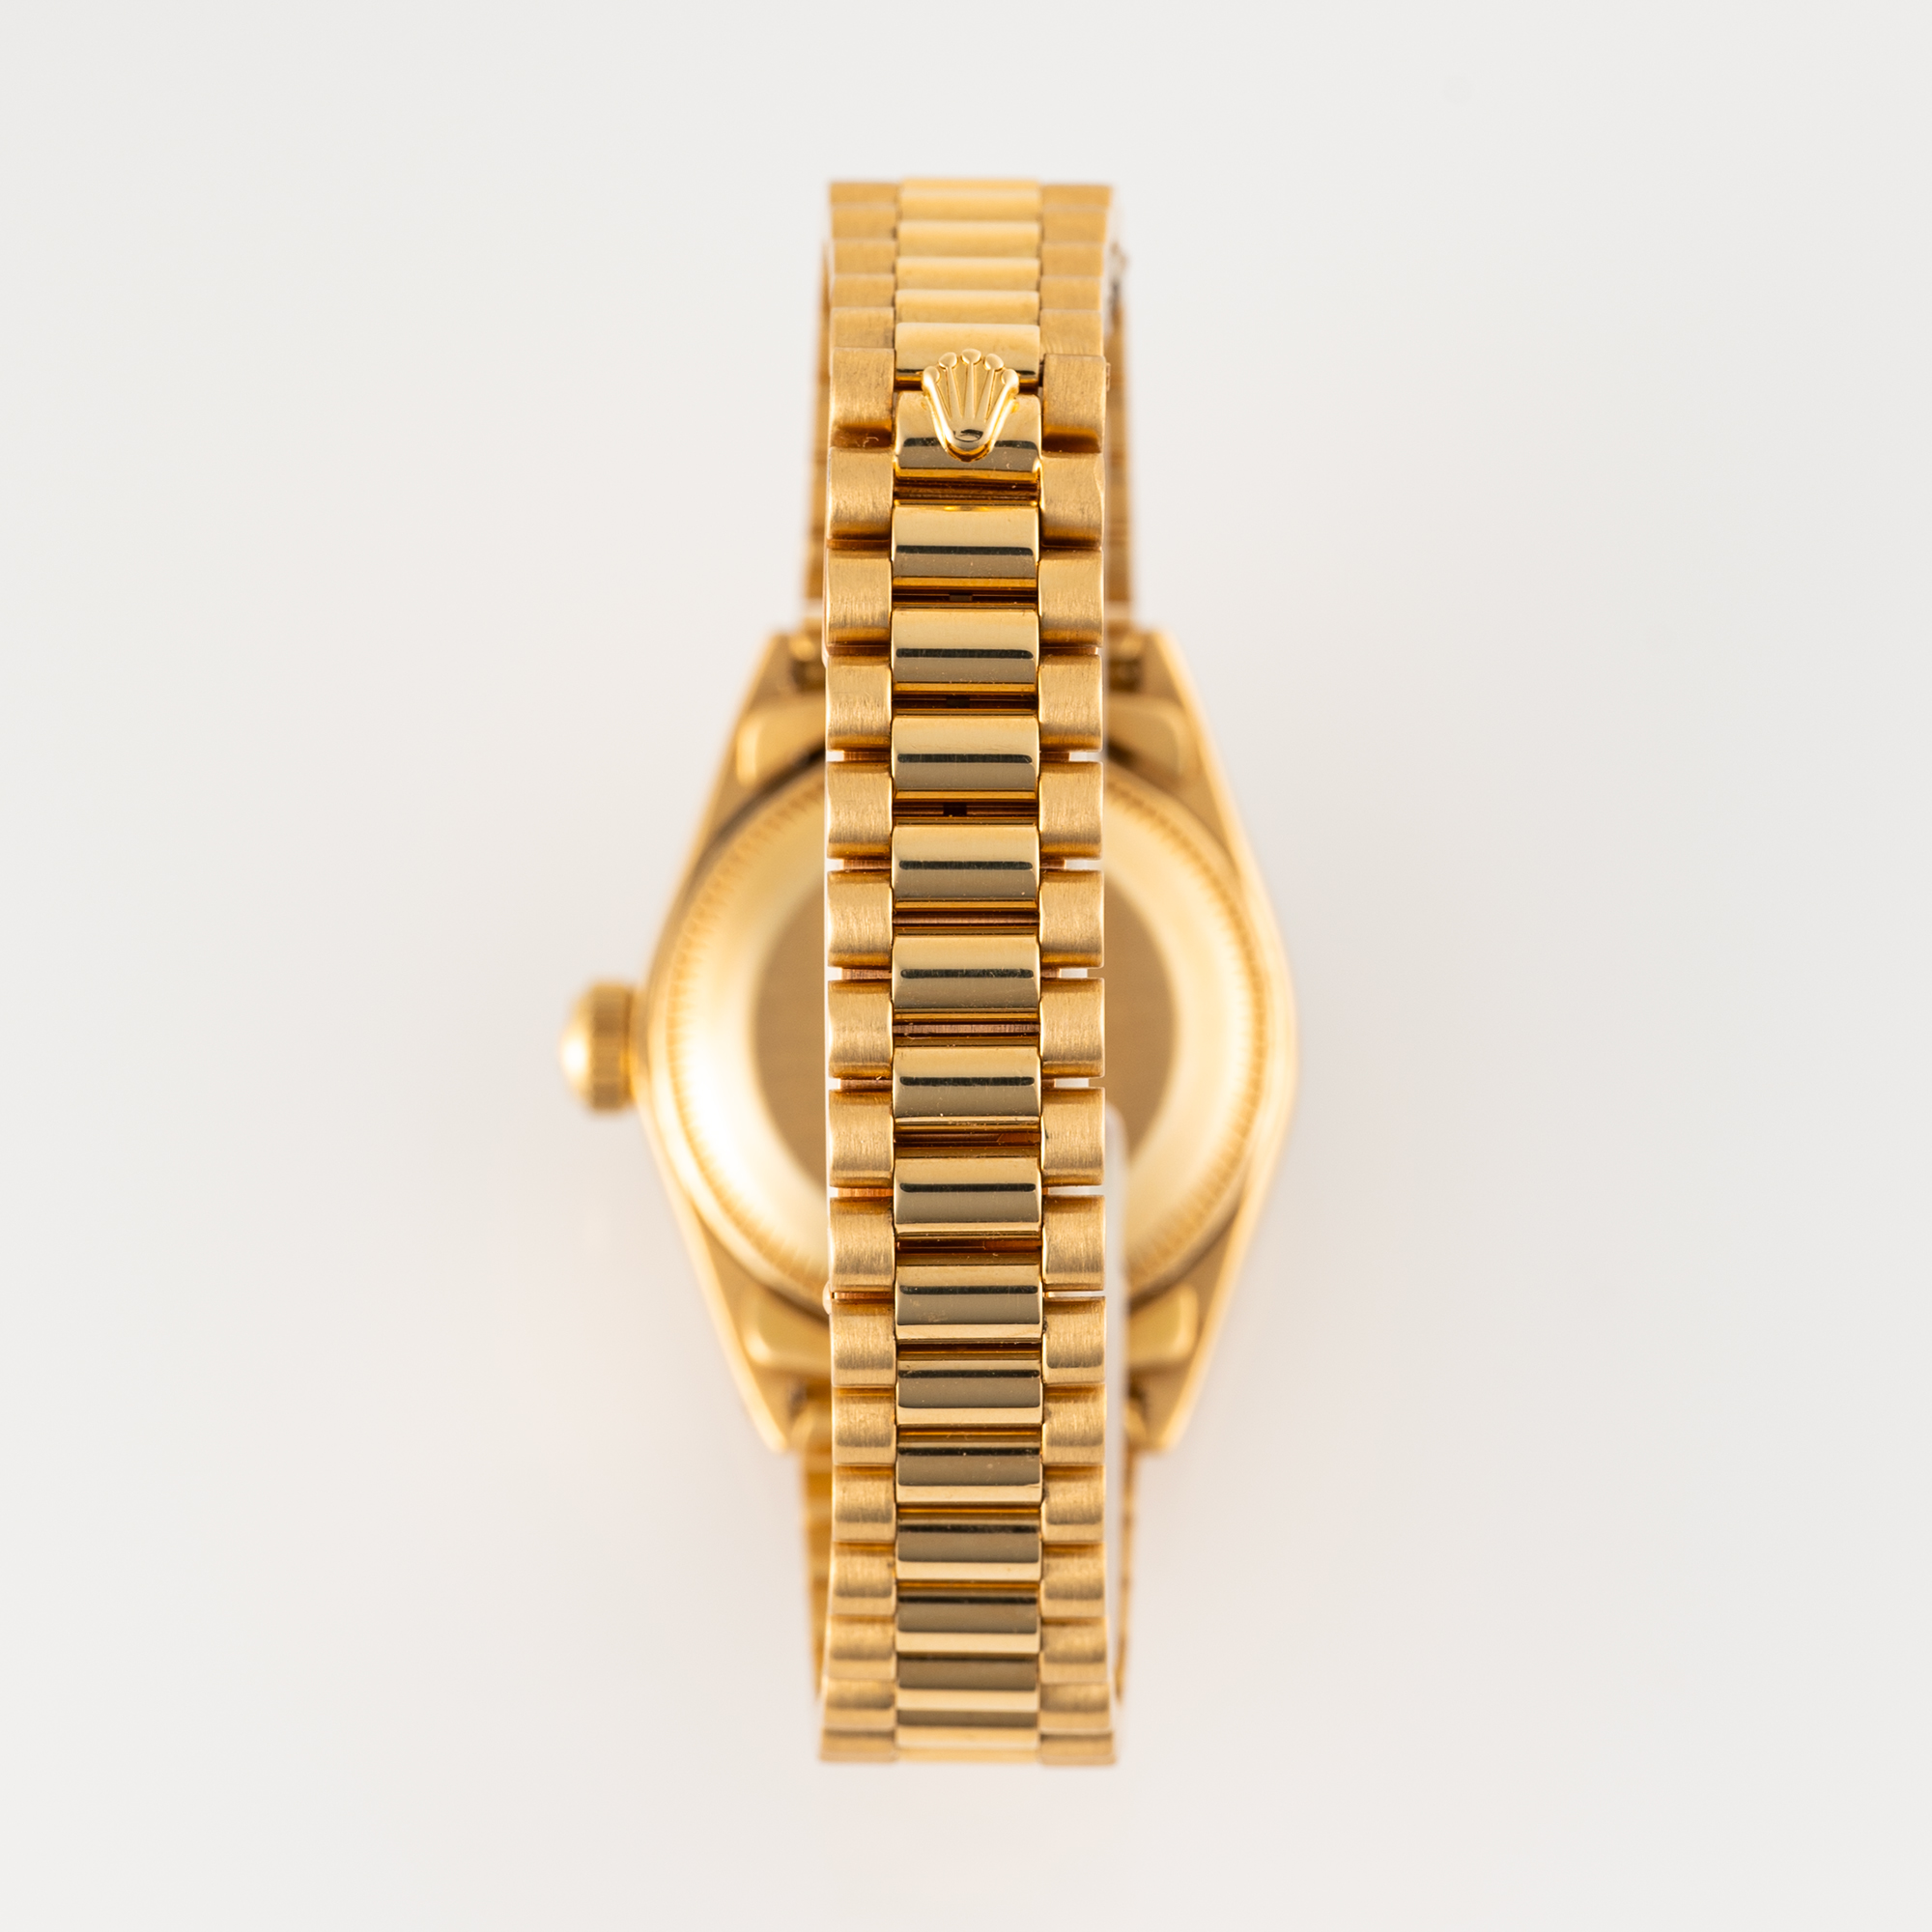 A LADY'S 18K SOLID GOLD ROLEX OYSTER PERPETUAL DATEJUST BRACELET WATCH CIRCA 1979, REF. 6917/8 - Image 9 of 9